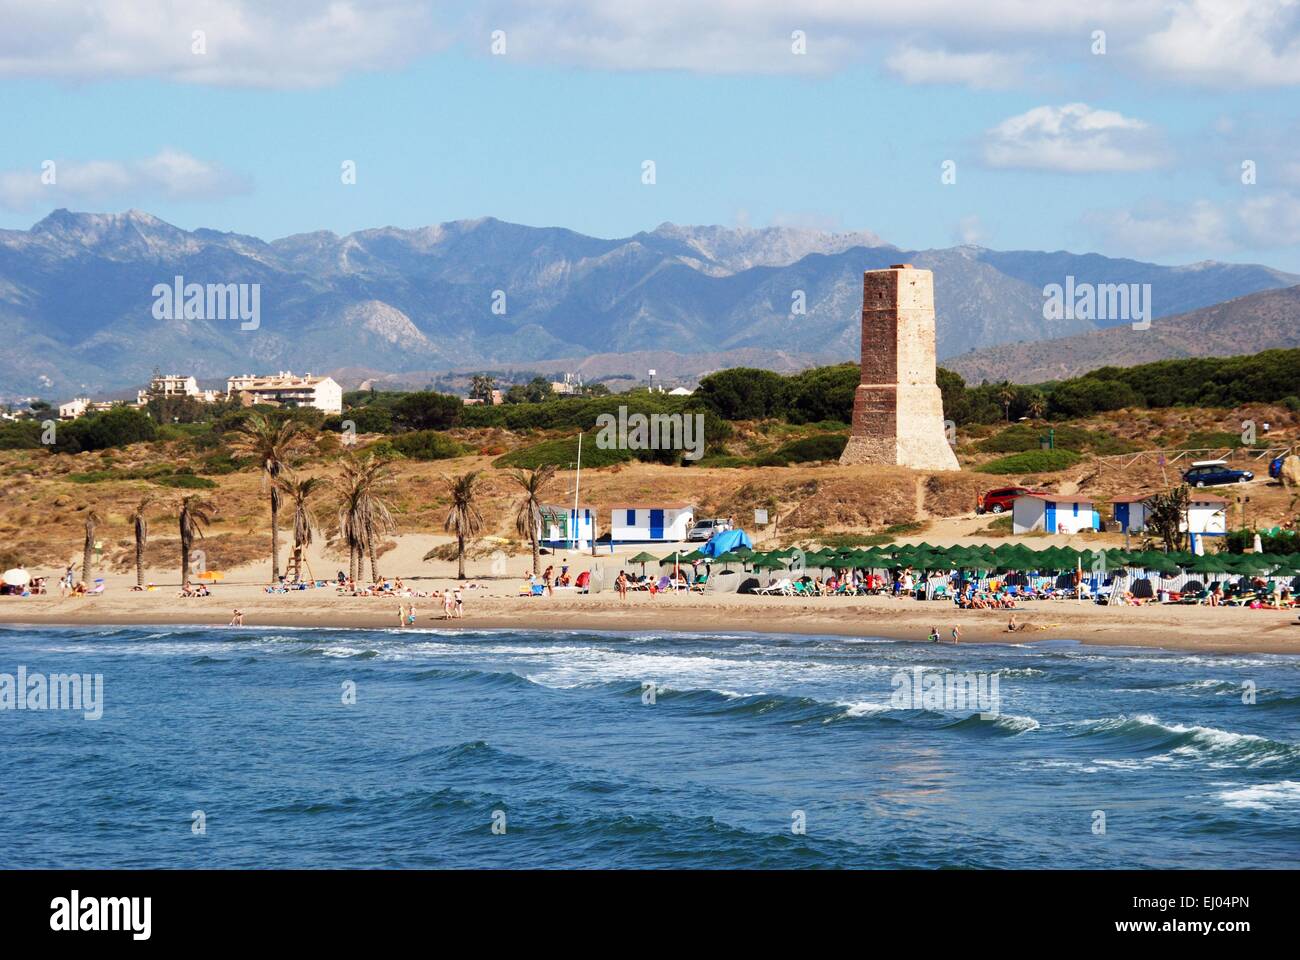 View of the beach with the watchtower and mountains to the rear, Puerto Cabopino, Costa del Sol, Malaga Province, Spain. Stock Photo